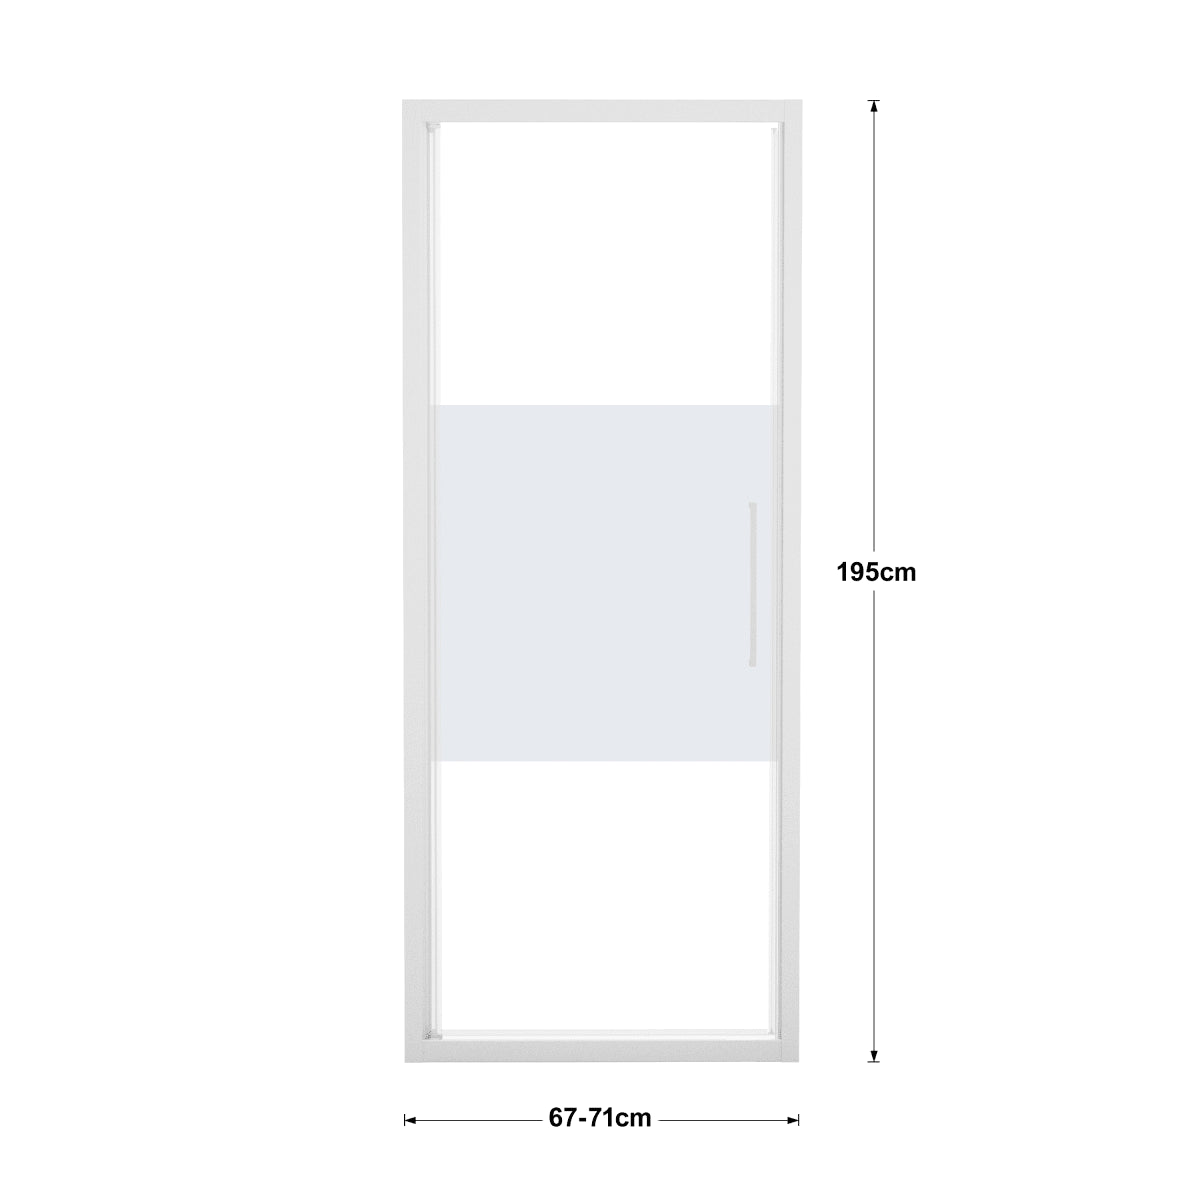 RECORD HINGED DOOR L 67-71 H 195 CM SCREEN-PRINTED GLASS 6 MM WHITE